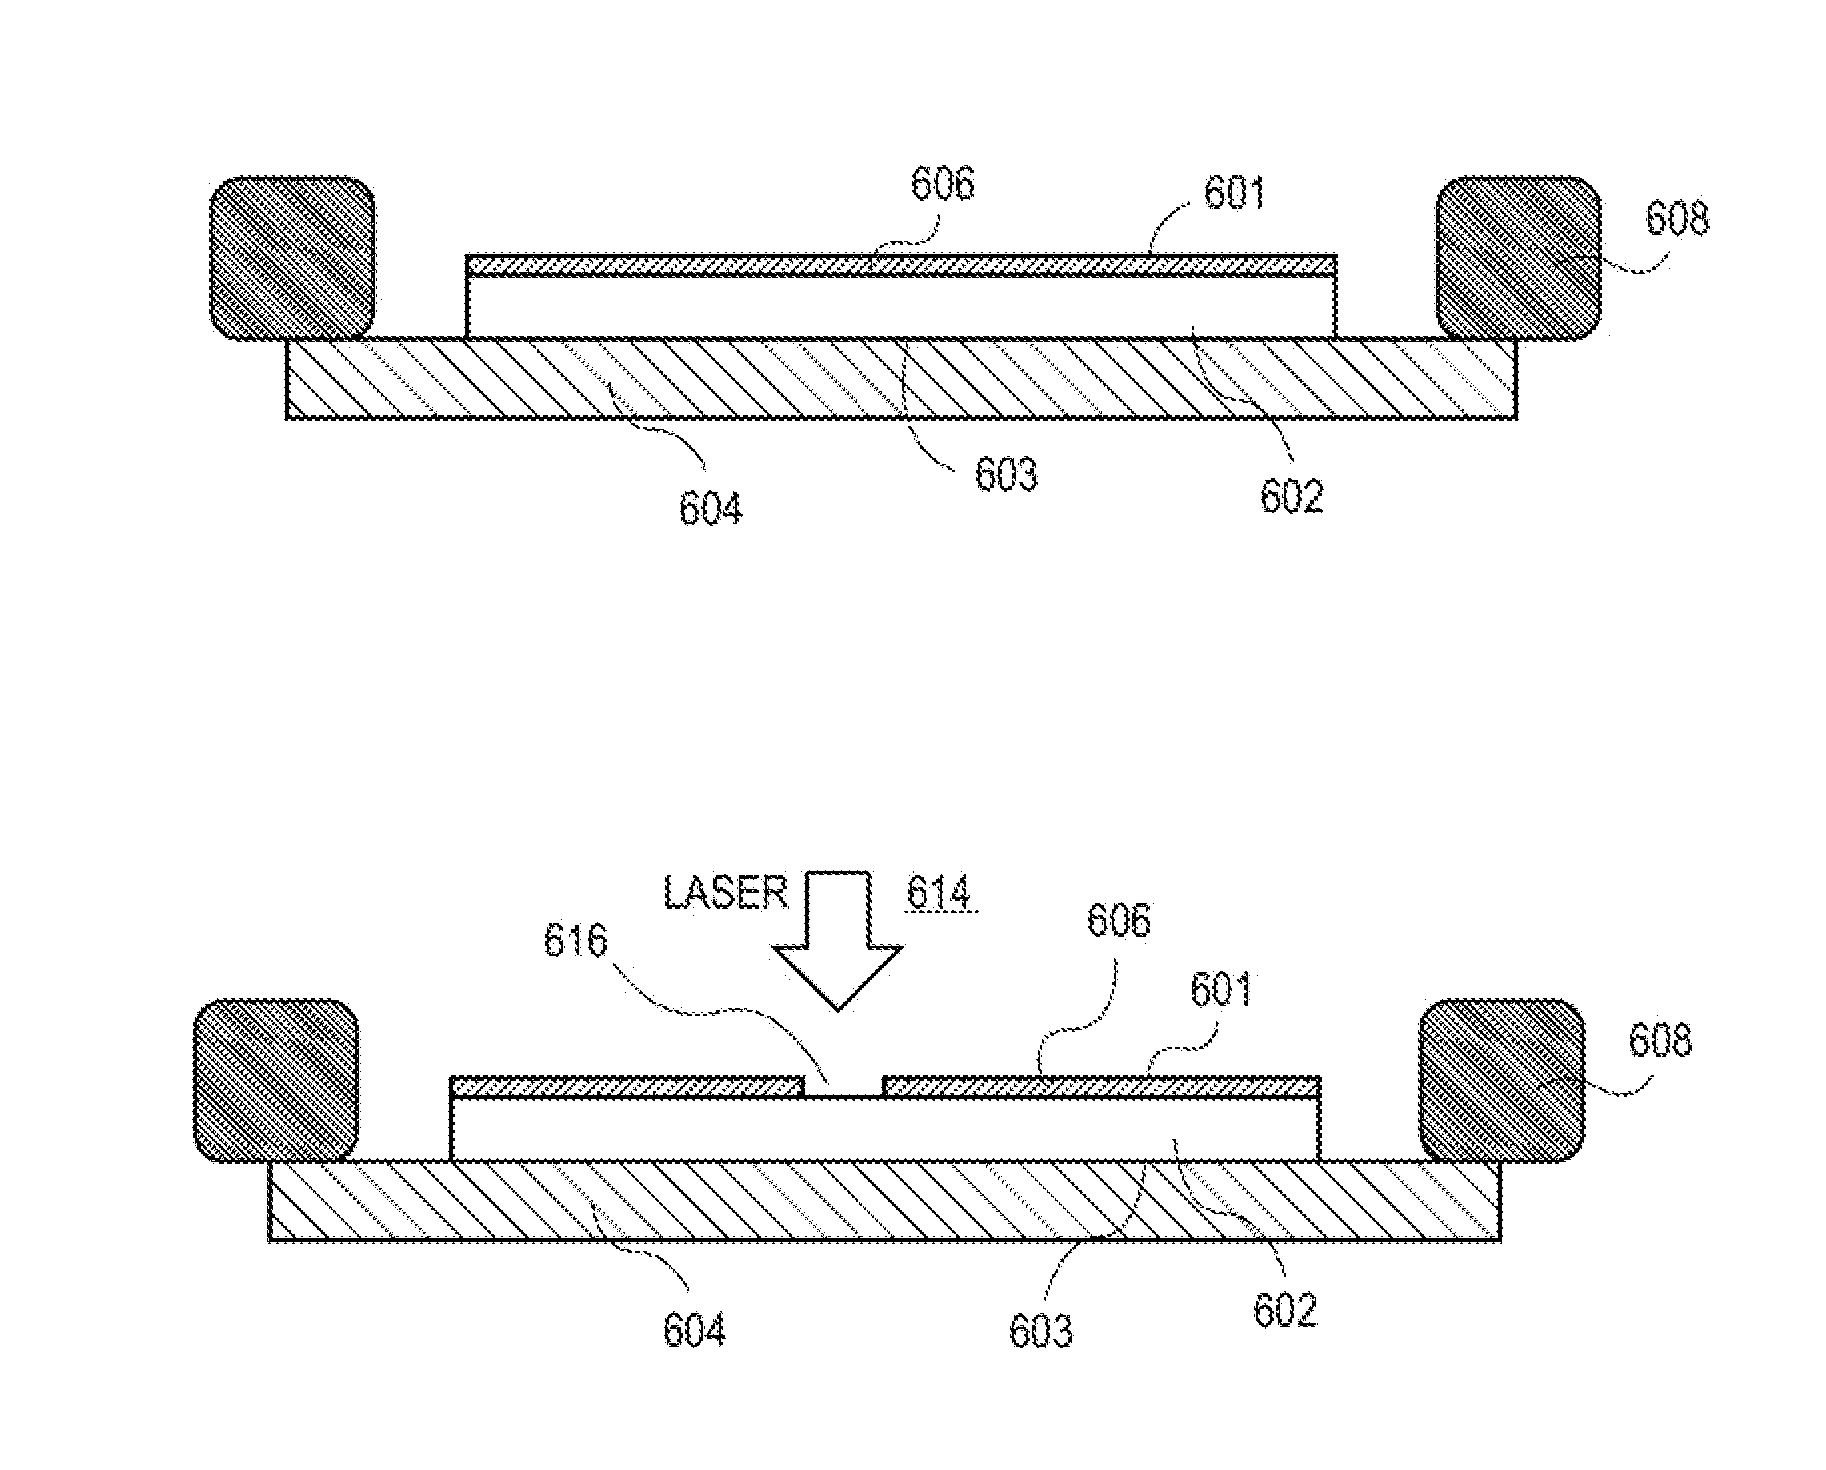 Method of die singulation using laser ablation and induction of internal defects with a laser